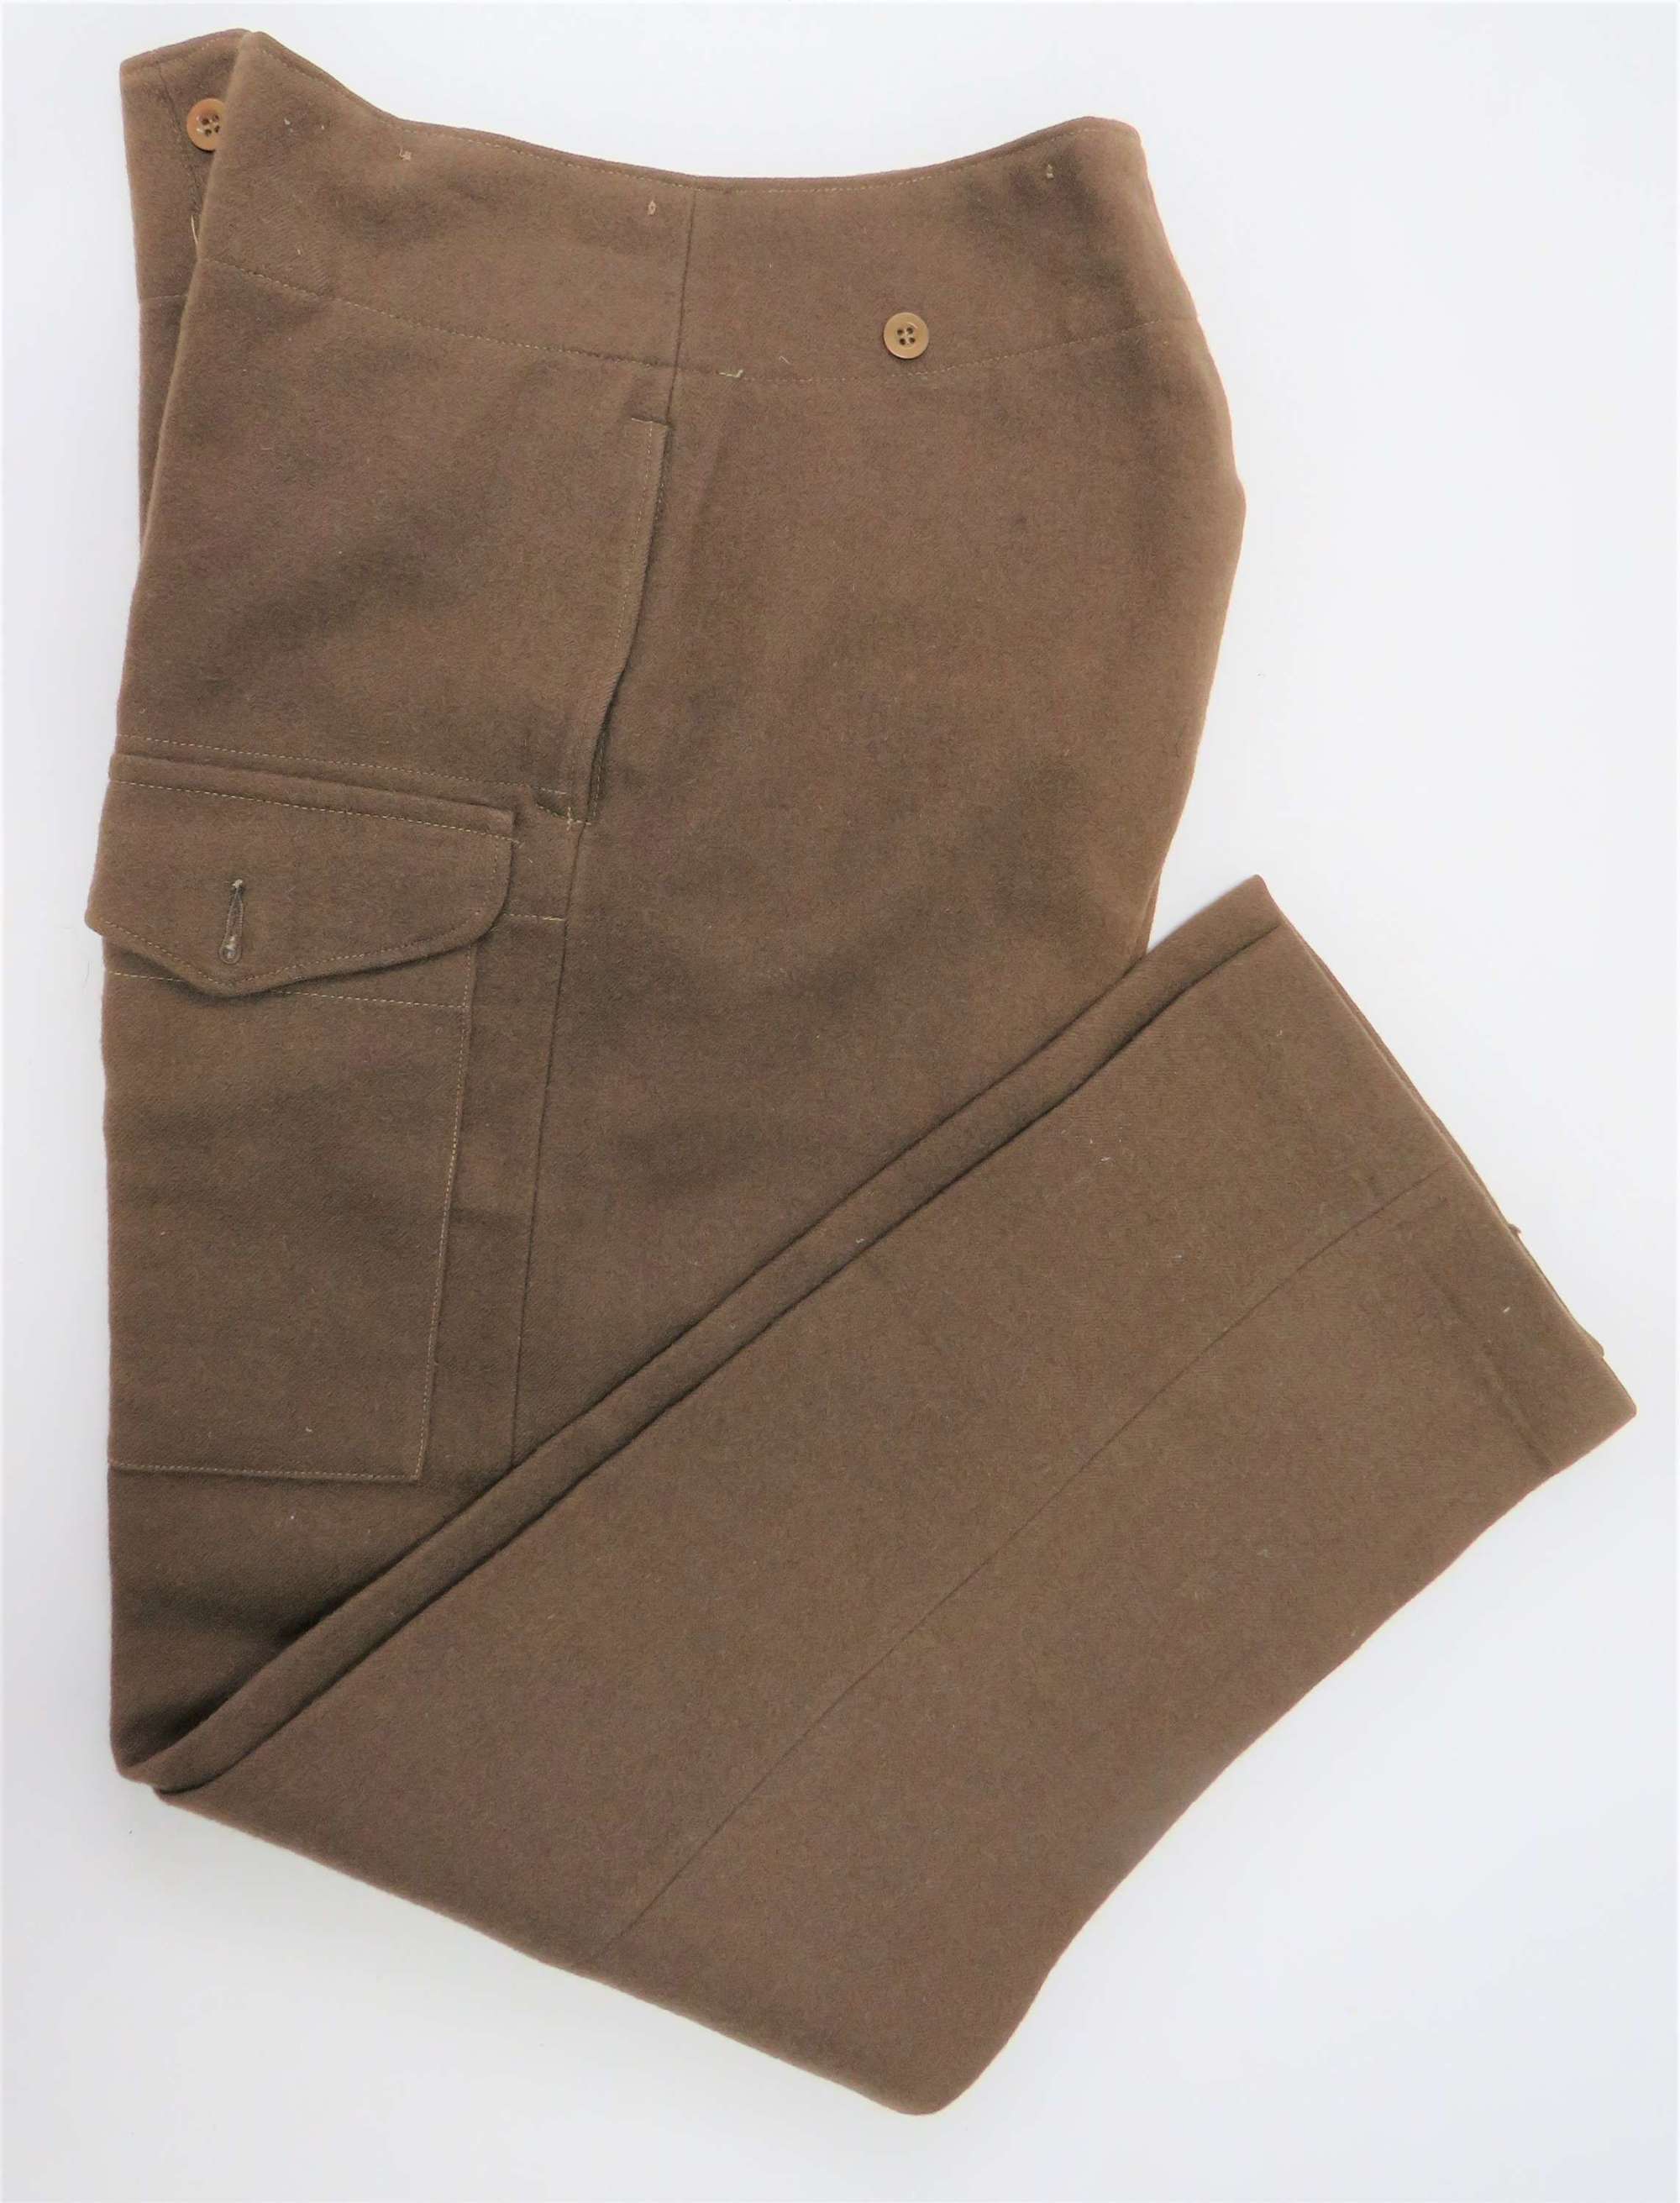 Pair of 1940 Pattern Officer Private Purchase Battledress Trousers